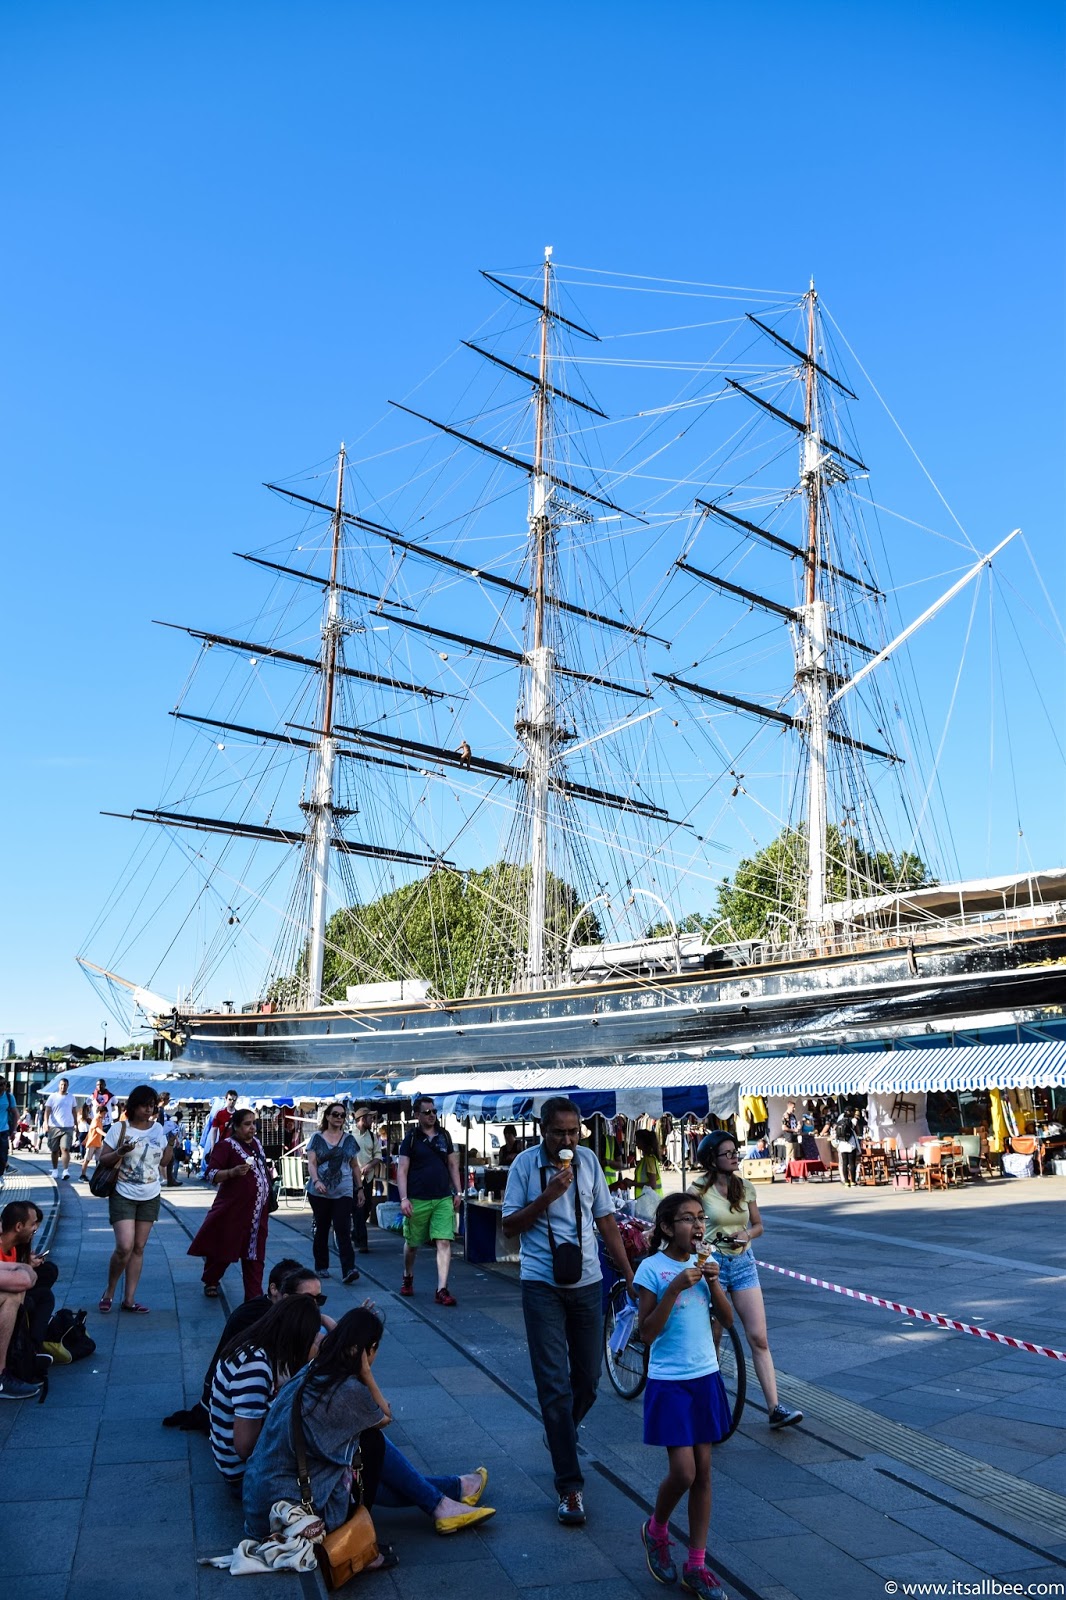 20 Of London's Unmissable Tourist Sights To Add To Your Itinerary Now | Cutty Sark London Greenwich